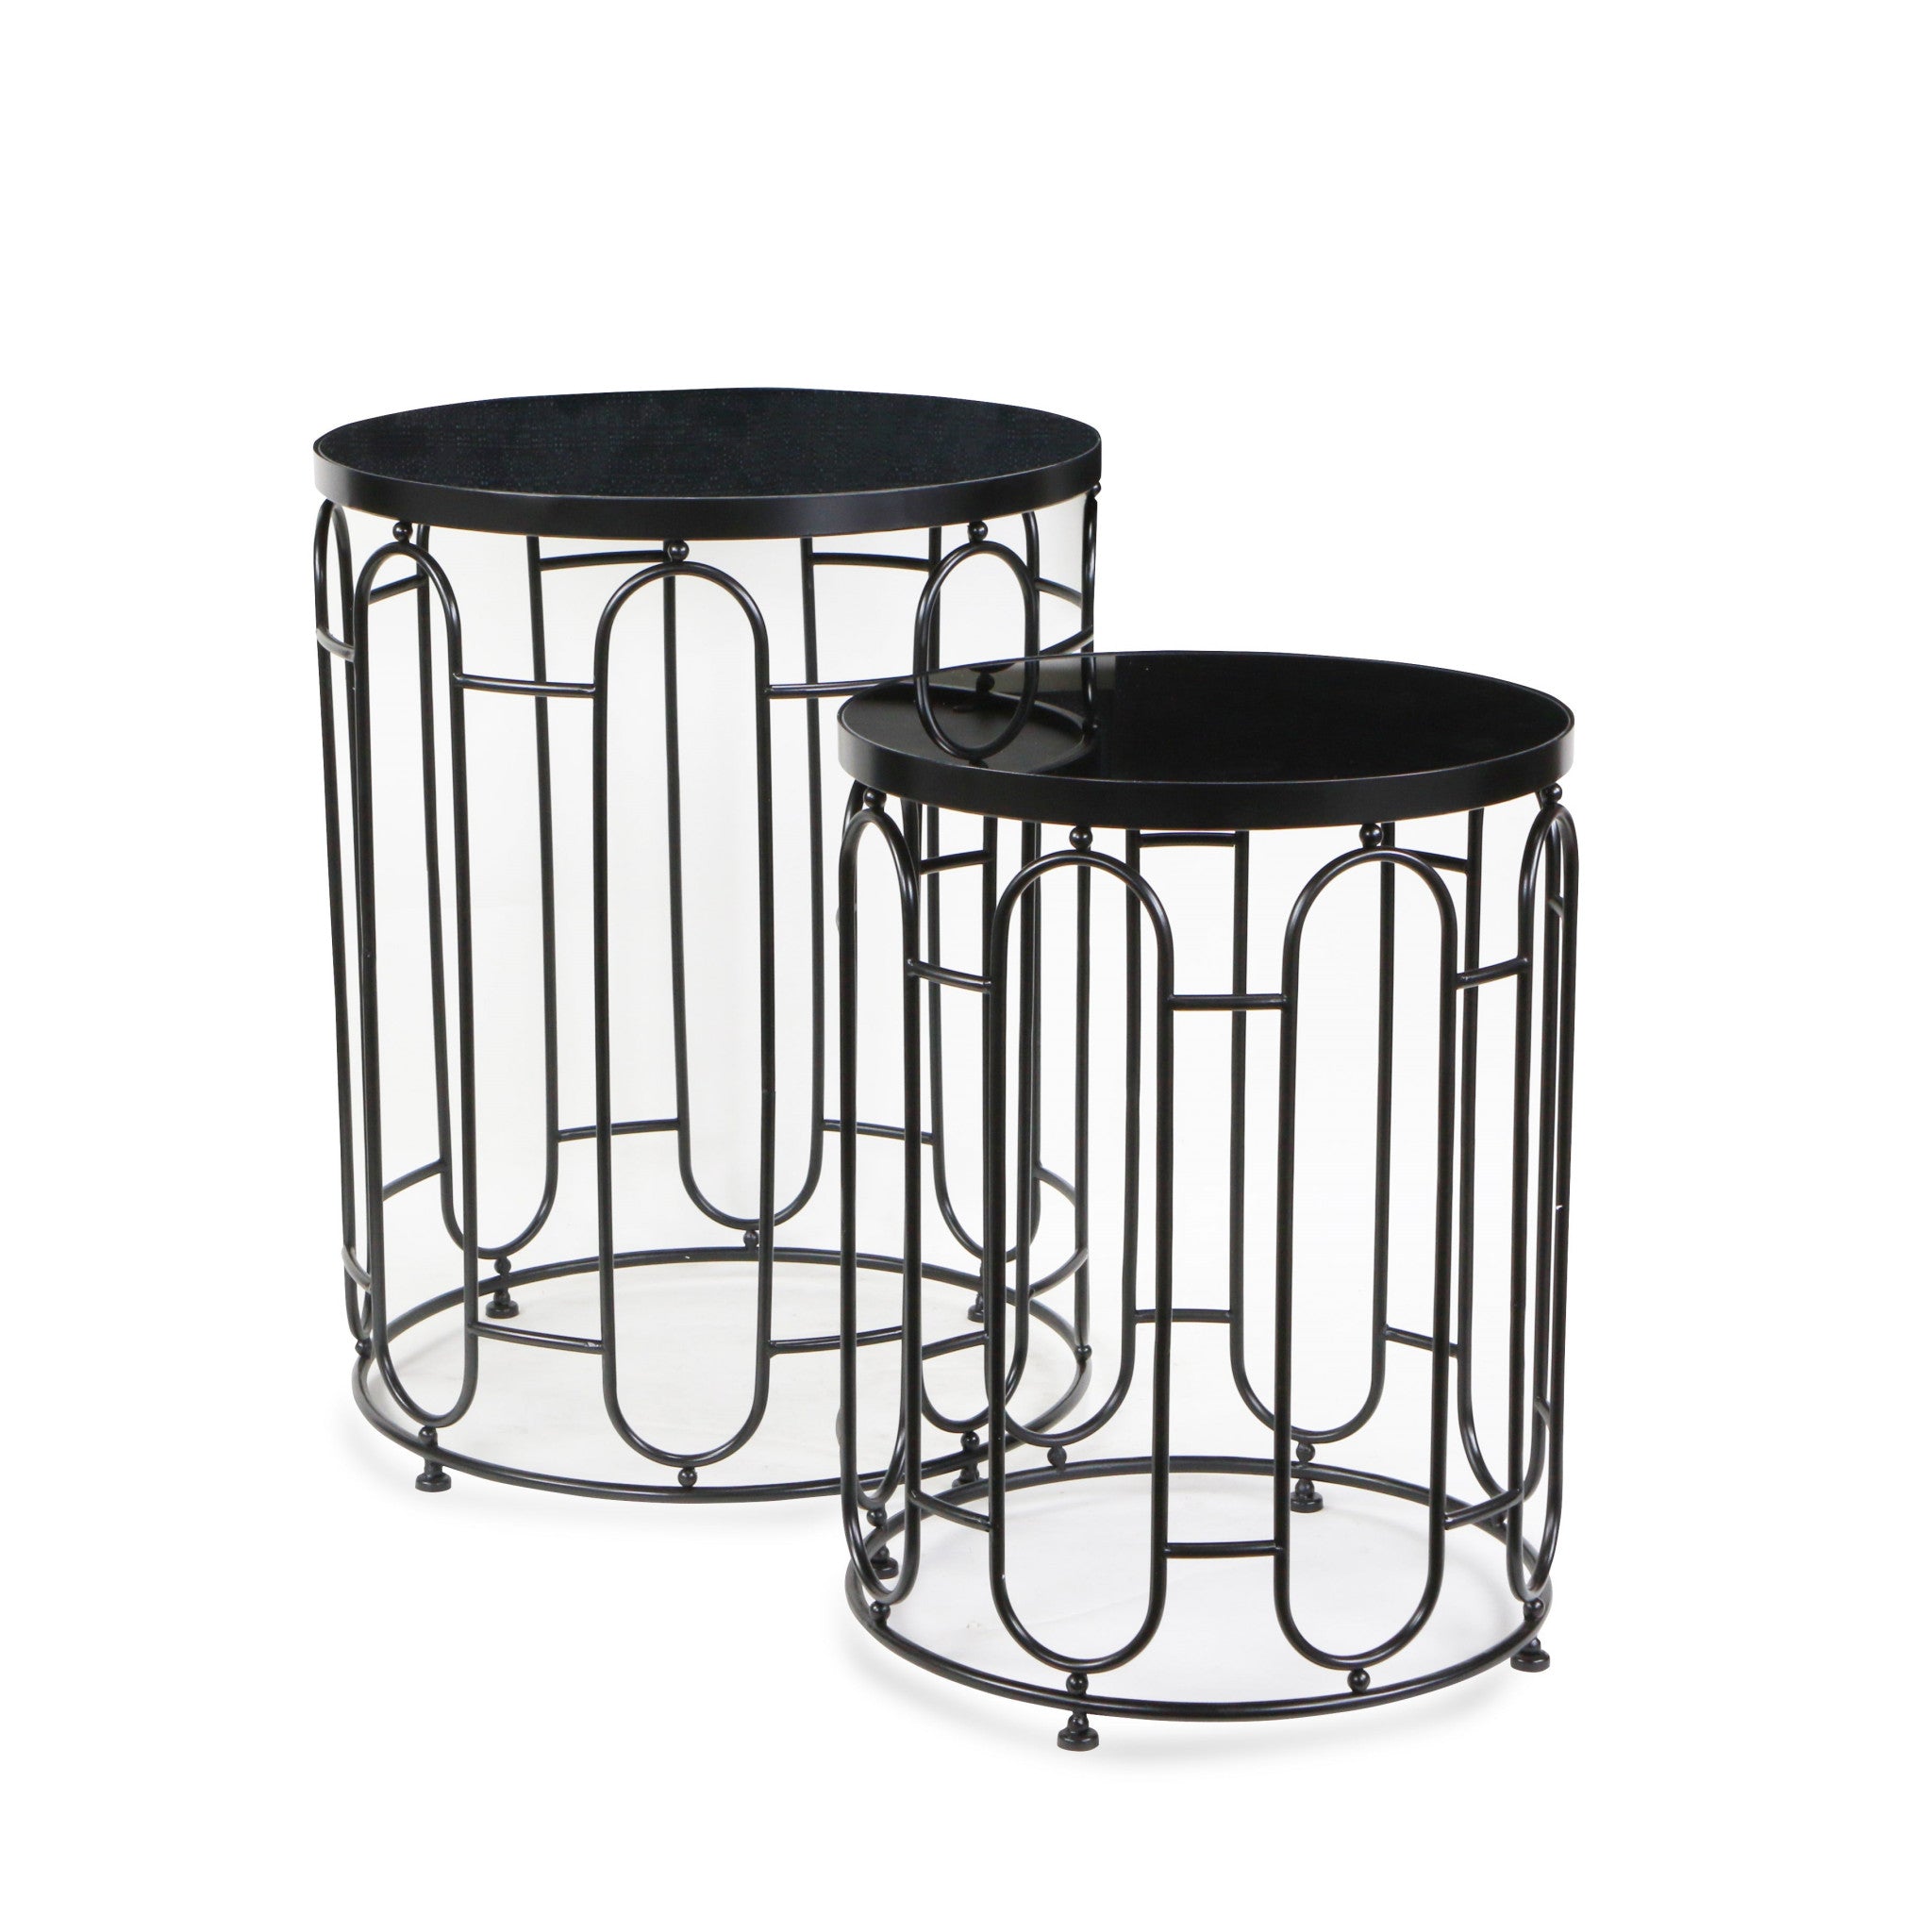 Set Of Two 24" Black Metal Round Nested Tables